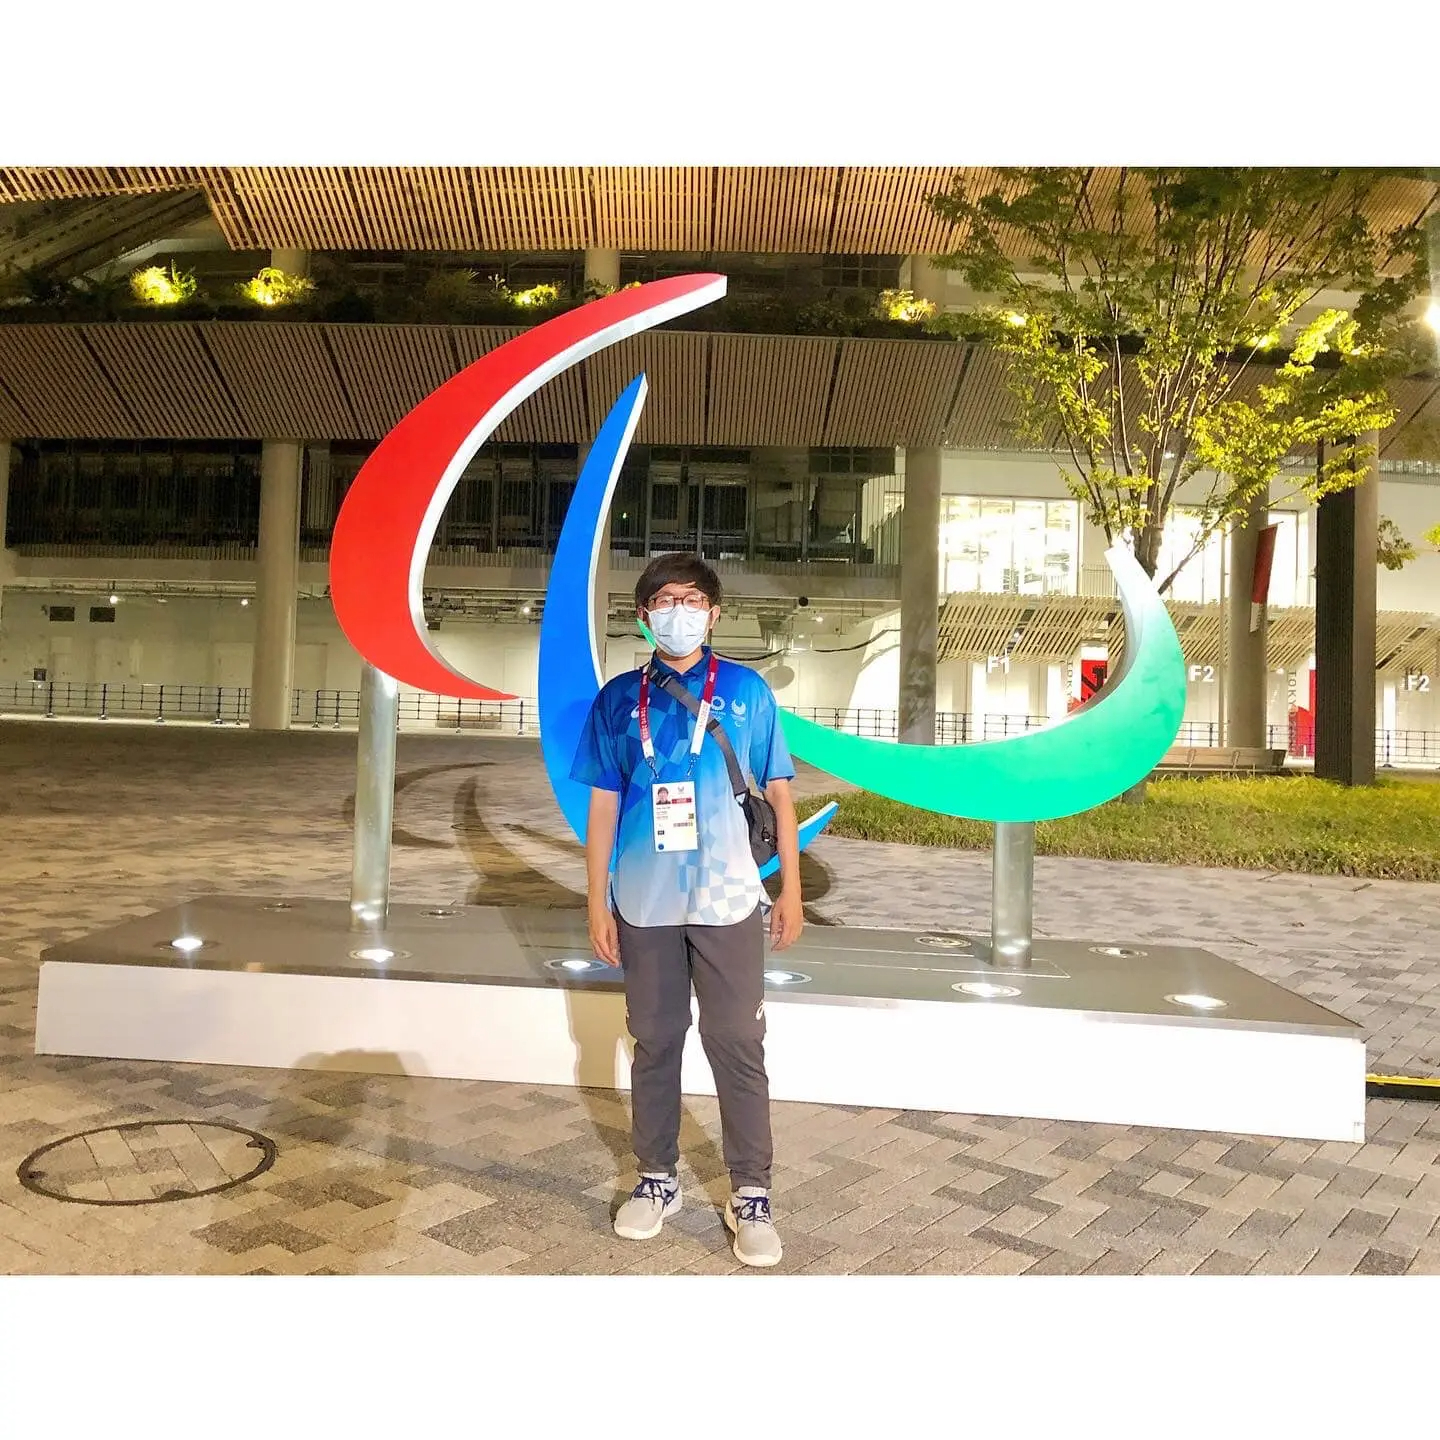 How yee in front of the tokyo olympics stadium.